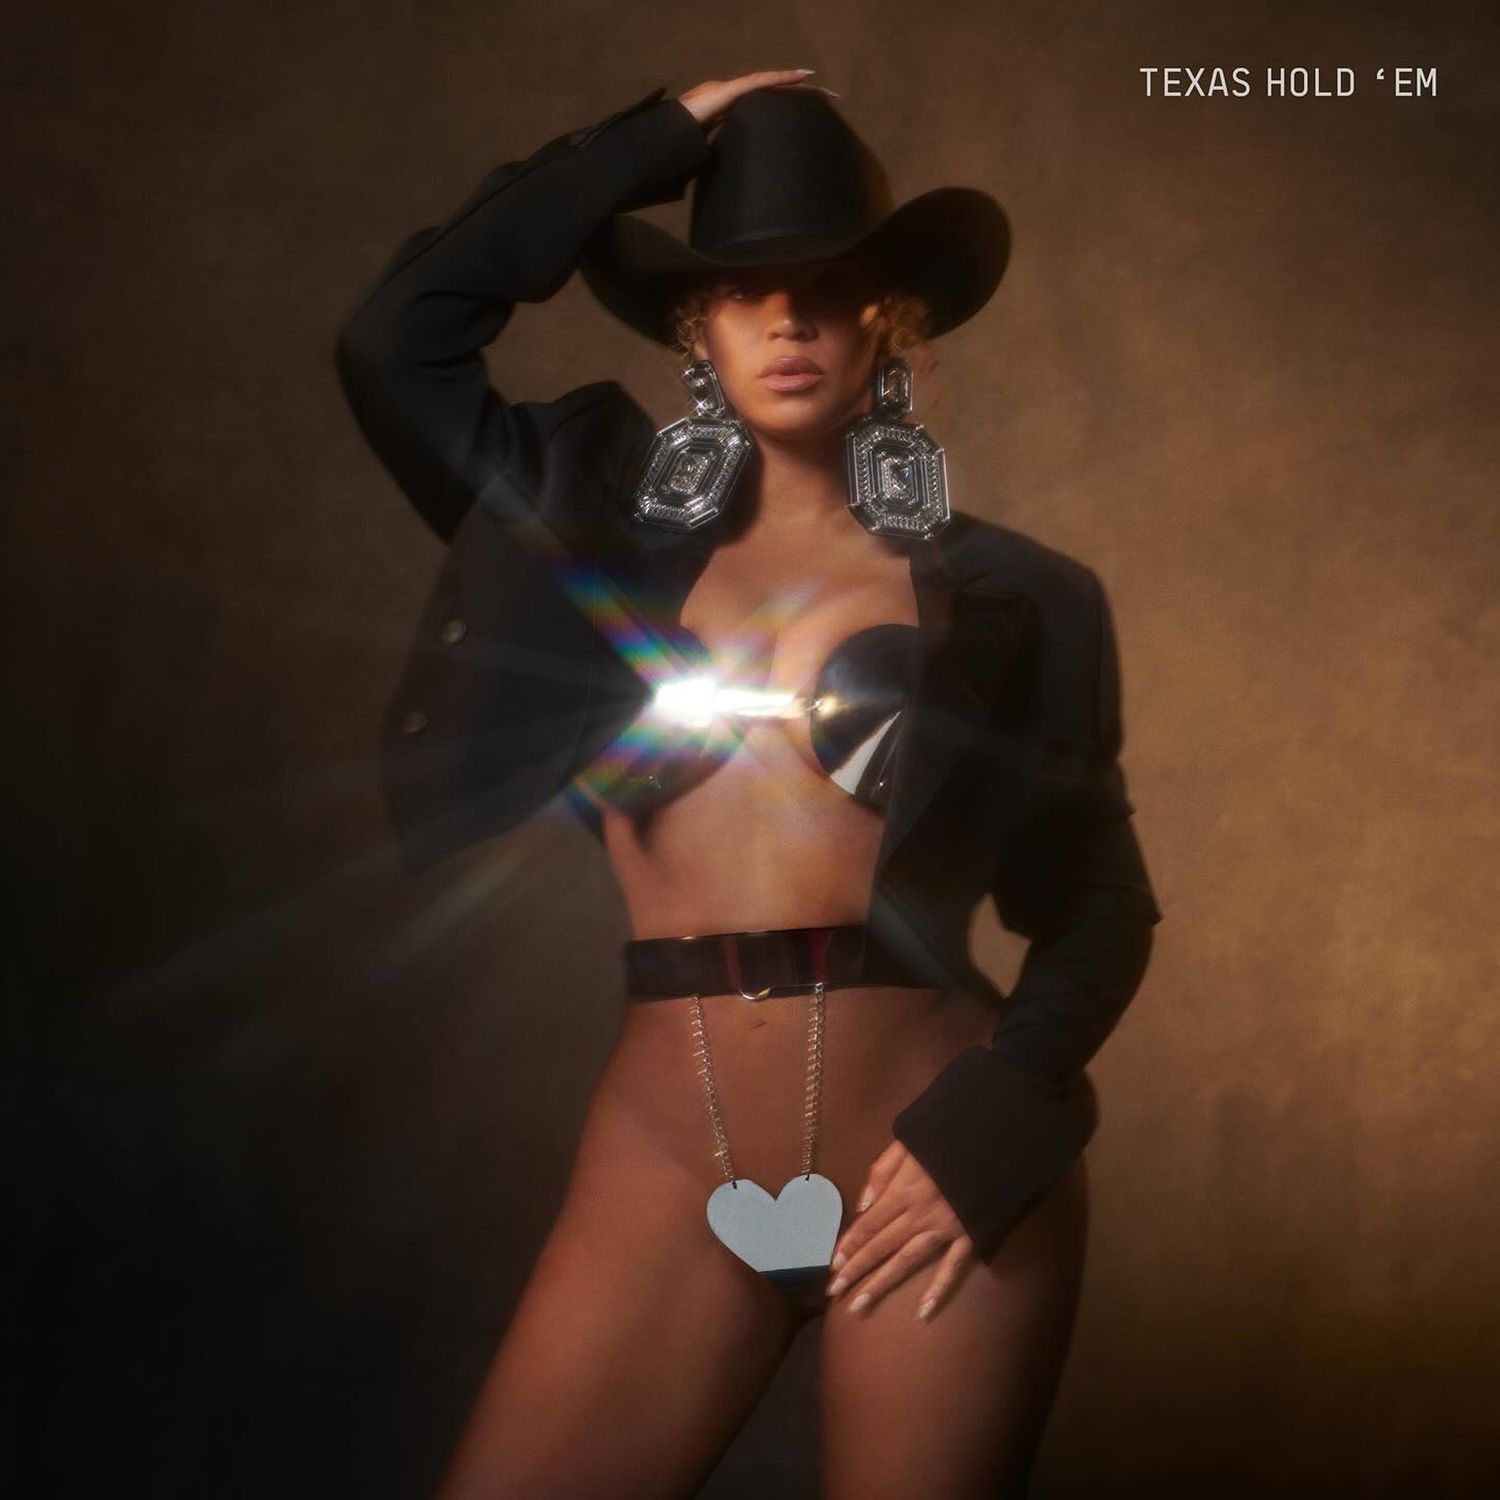 Beyonce's 'Texas Hold 'Em' cover art. 